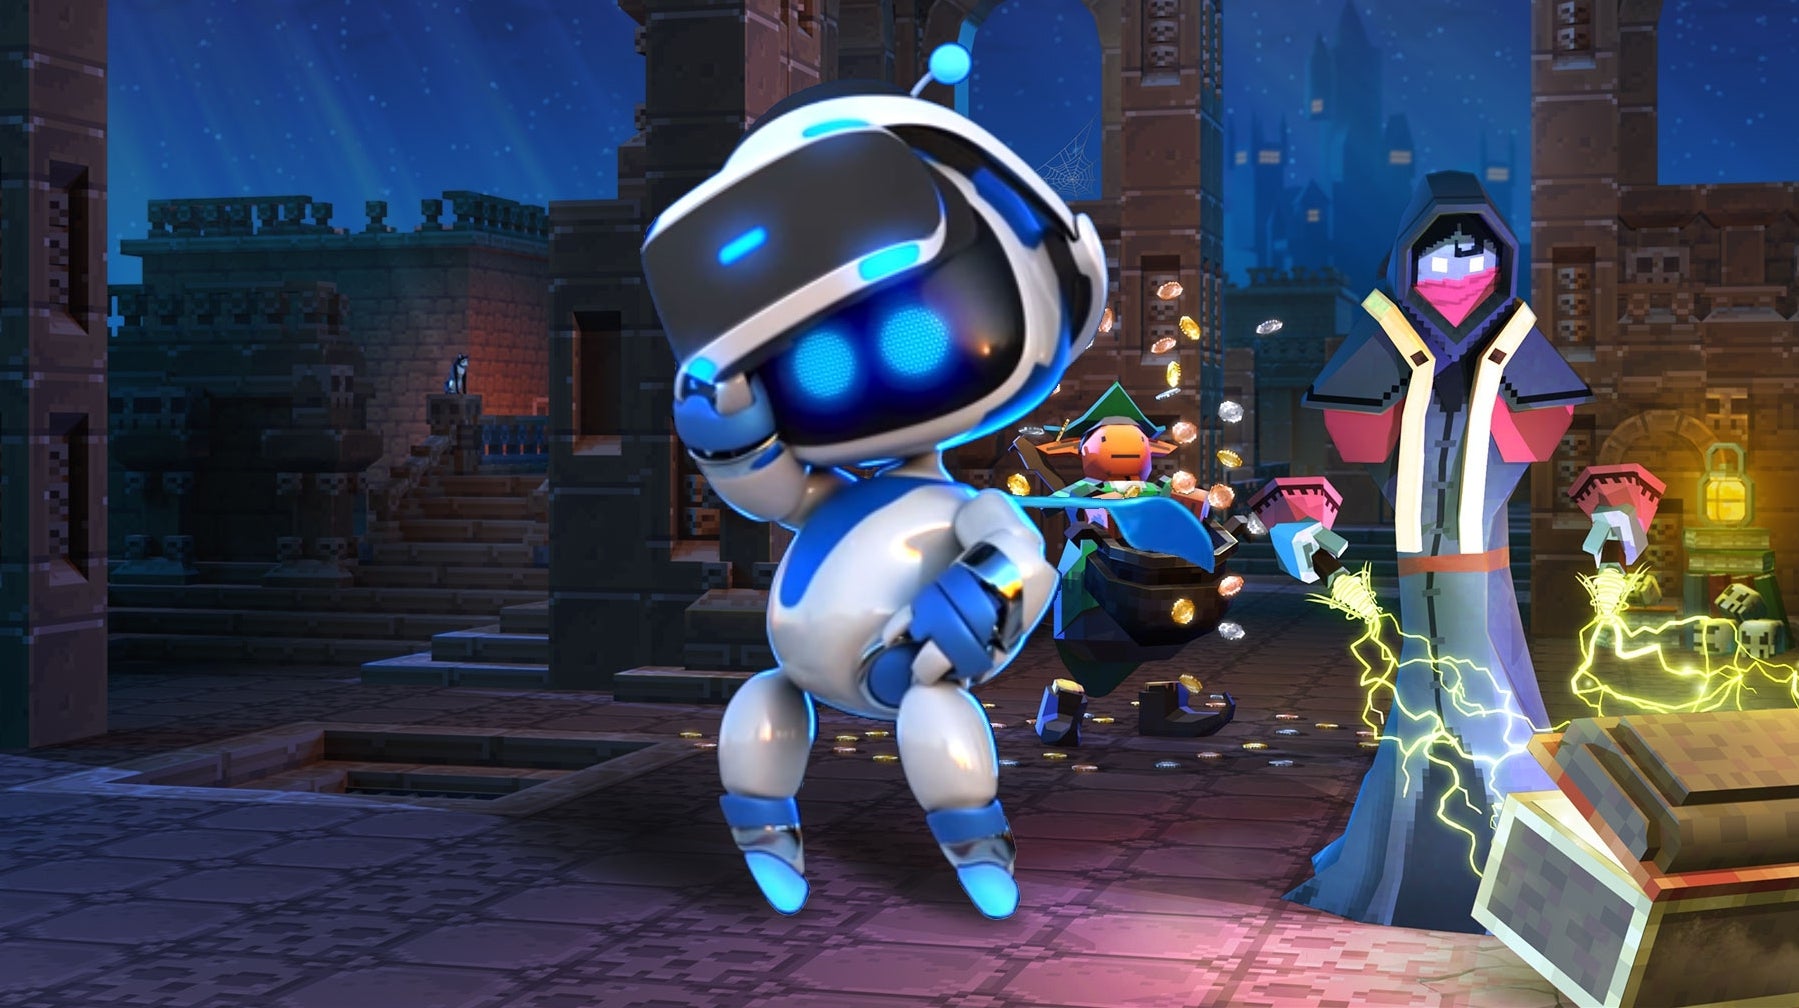 Image for Astro Bot Rescue Mission and Smash Hit Plunder light up PSVR with magic and originality